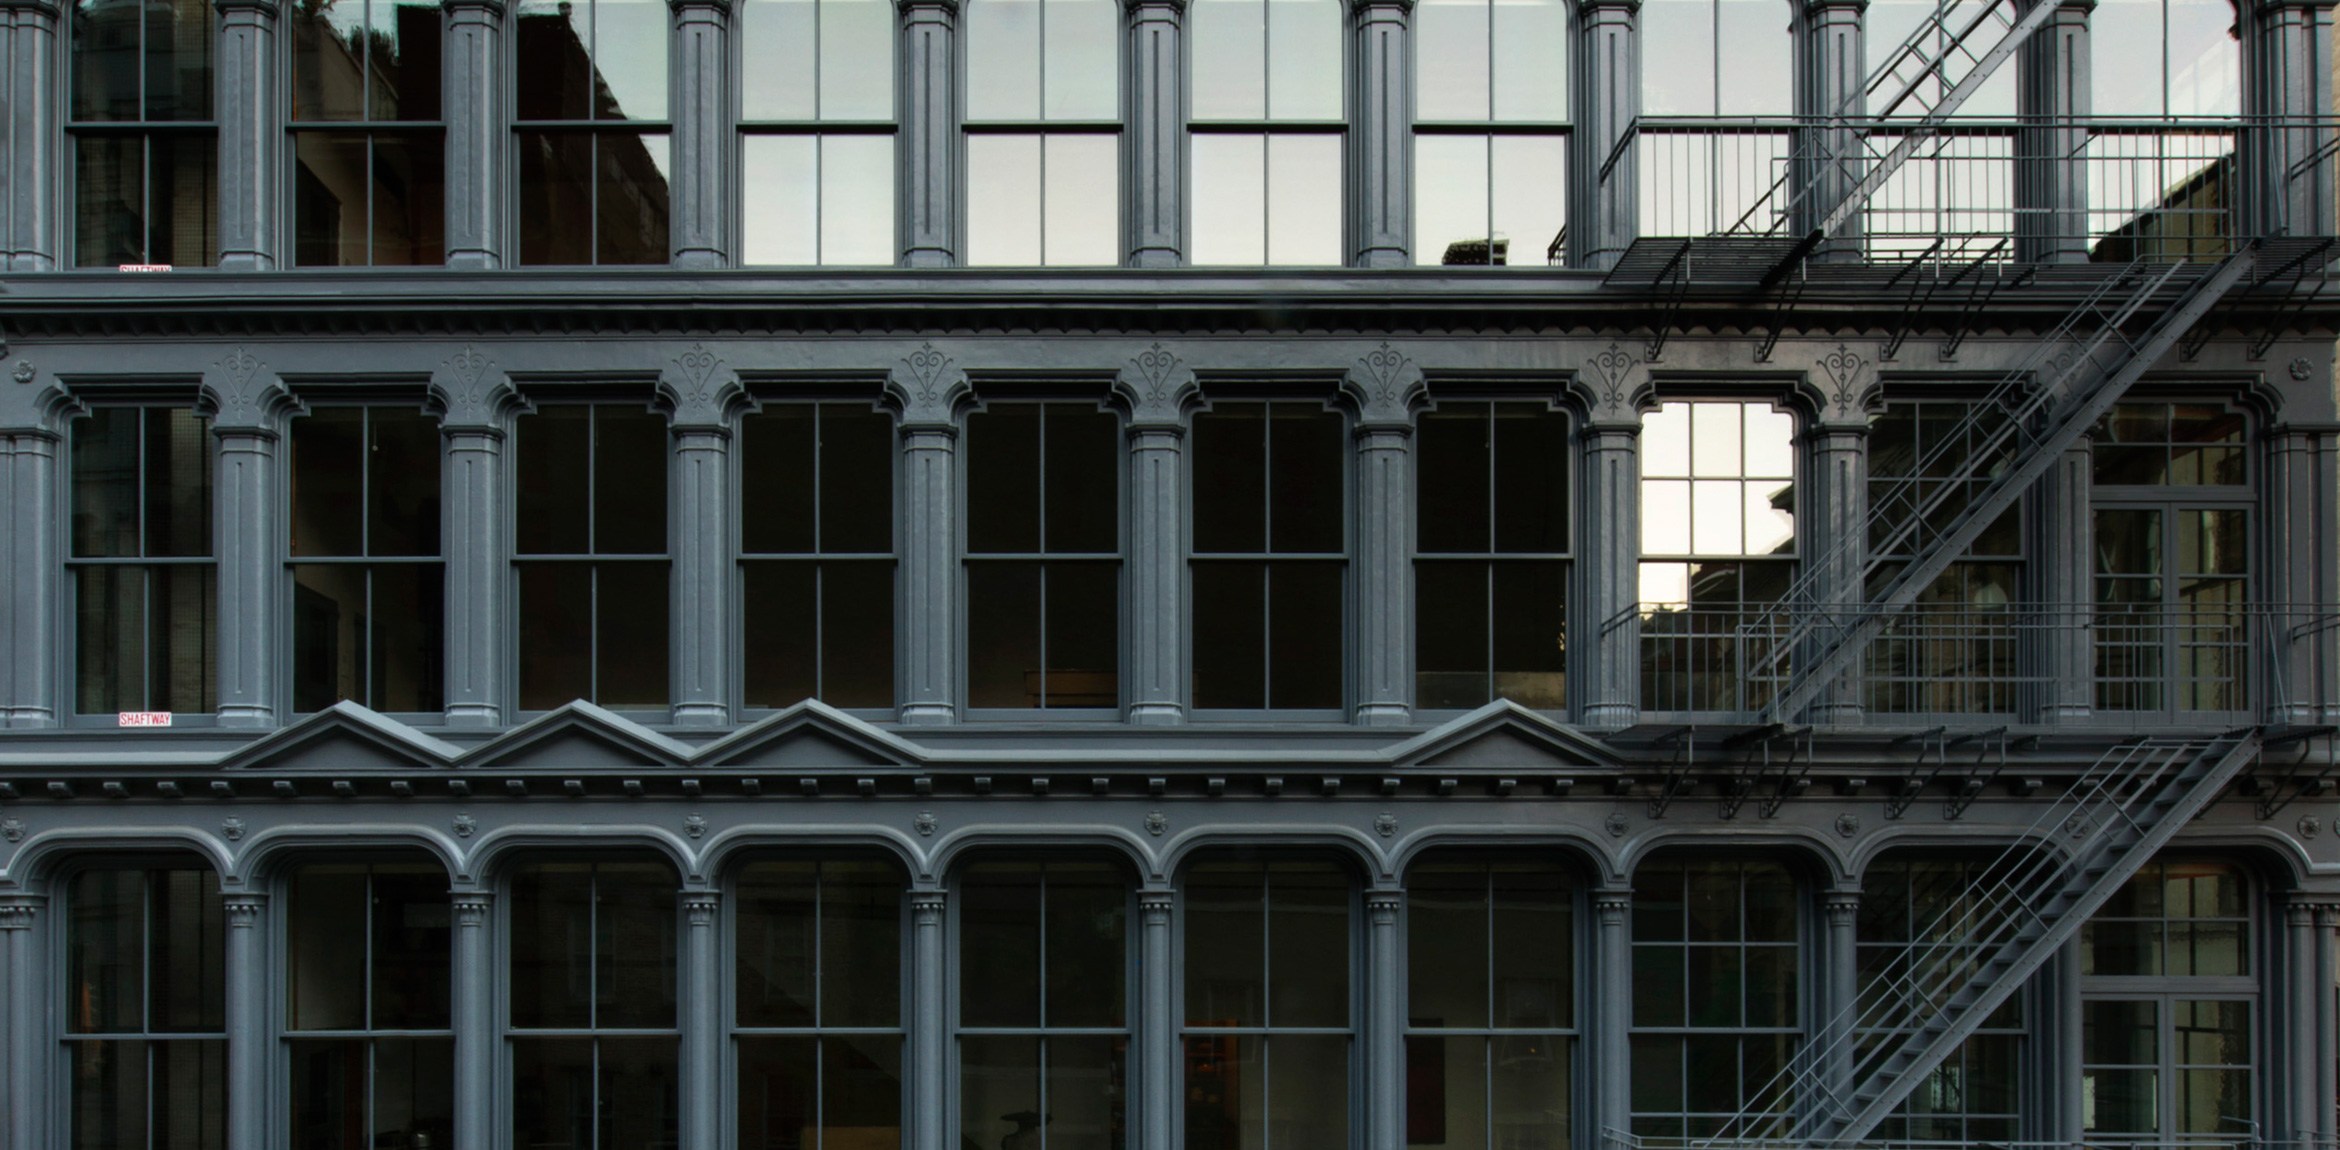 A view of 101 Spring Street in New York's windows.